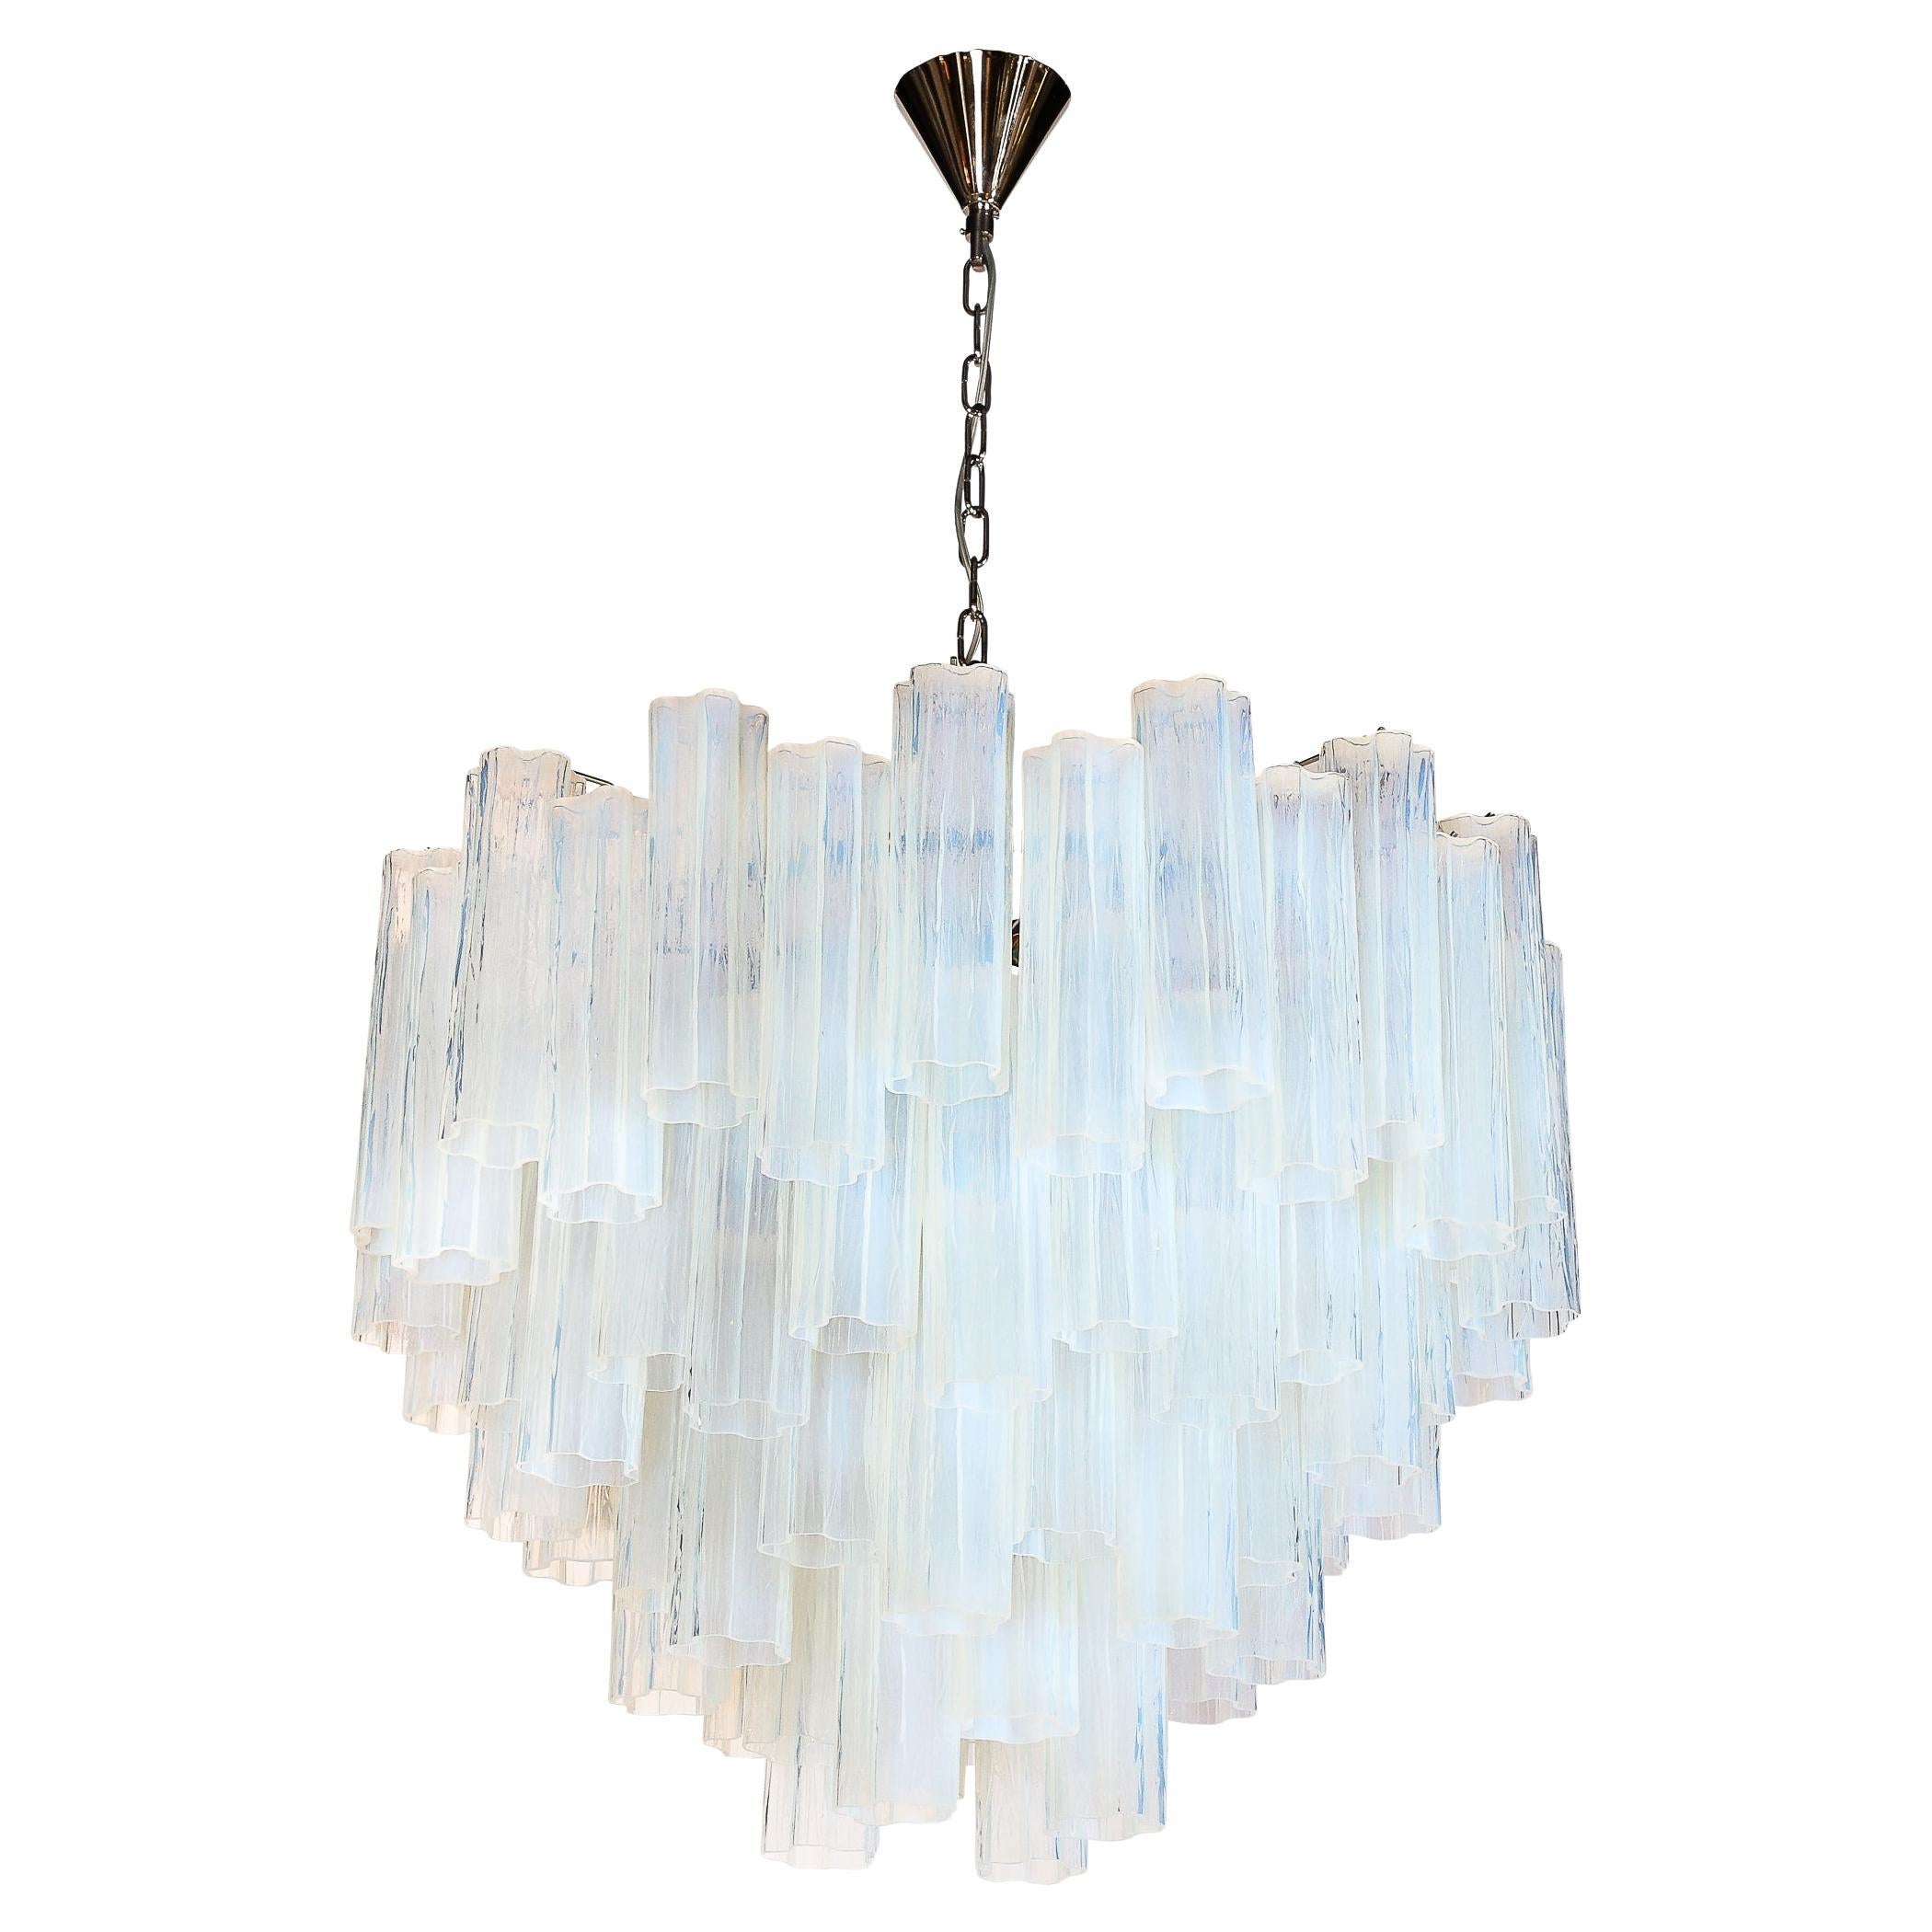 Modernist Hand-Blown Murano Opalescent Four Tiered Tronchi Glass Chandelier For Sale